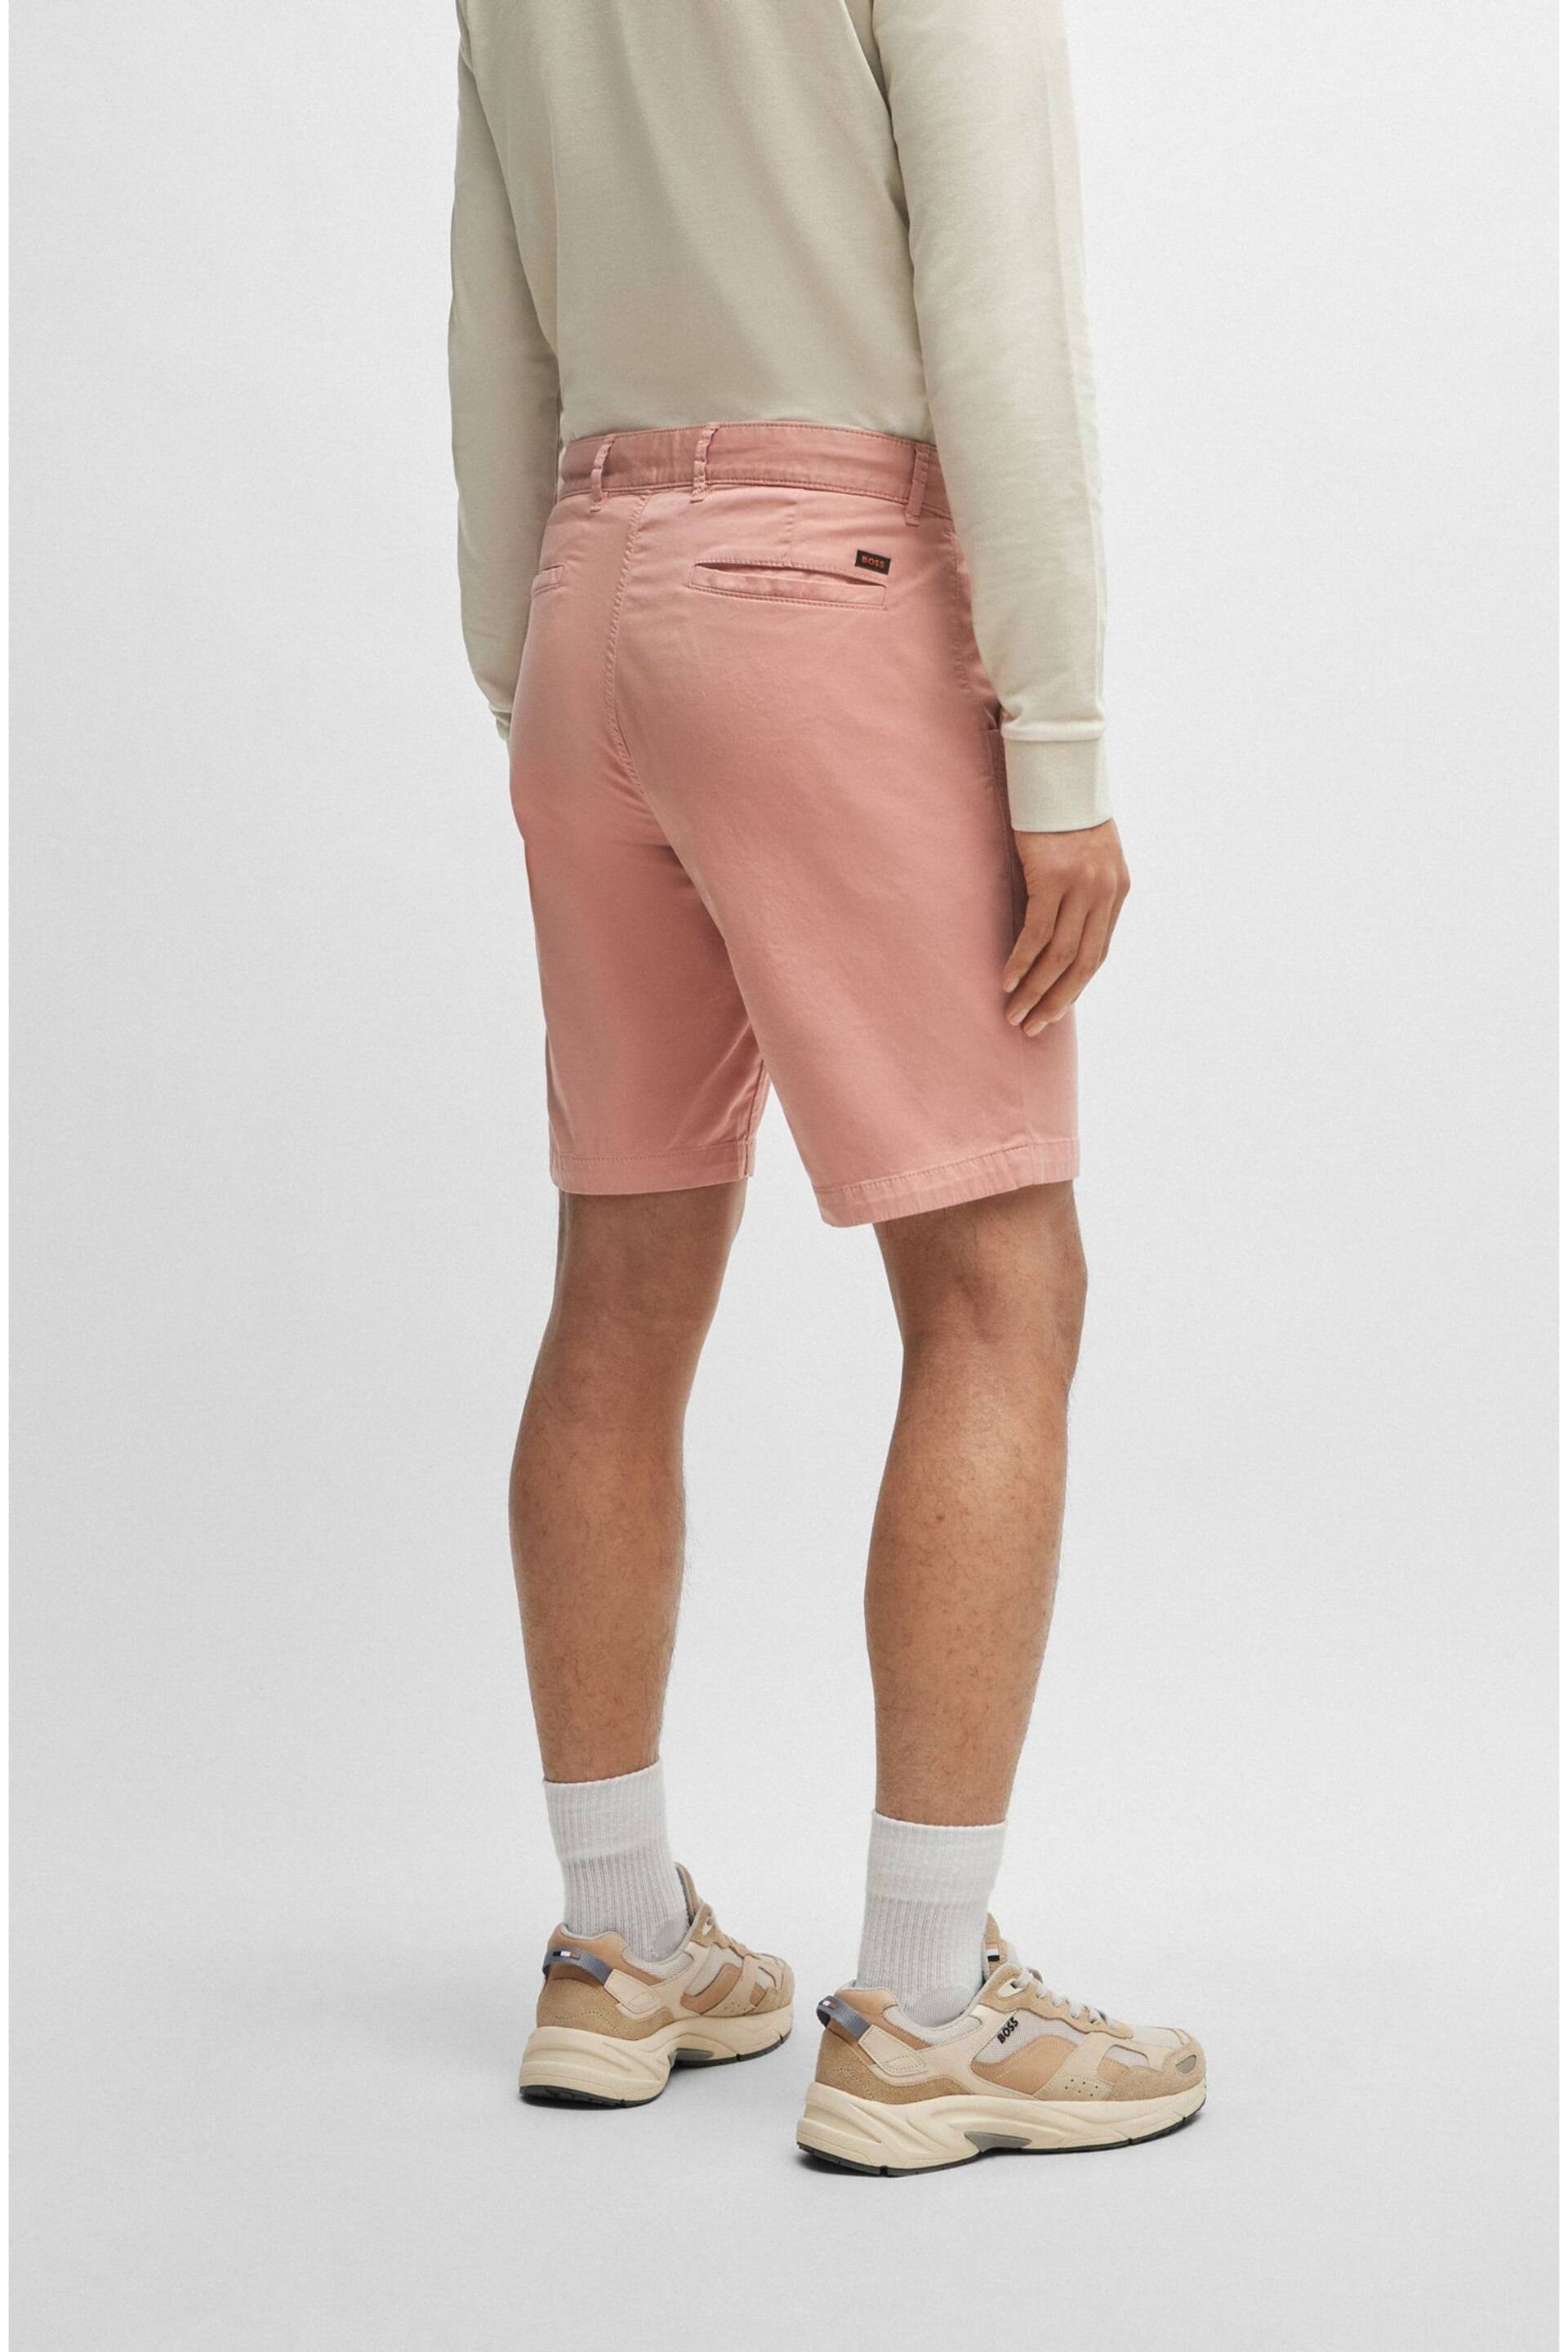 BOSS Pink Slim Fit Stretch Cotton Chino Shorts - Image 2 of 5